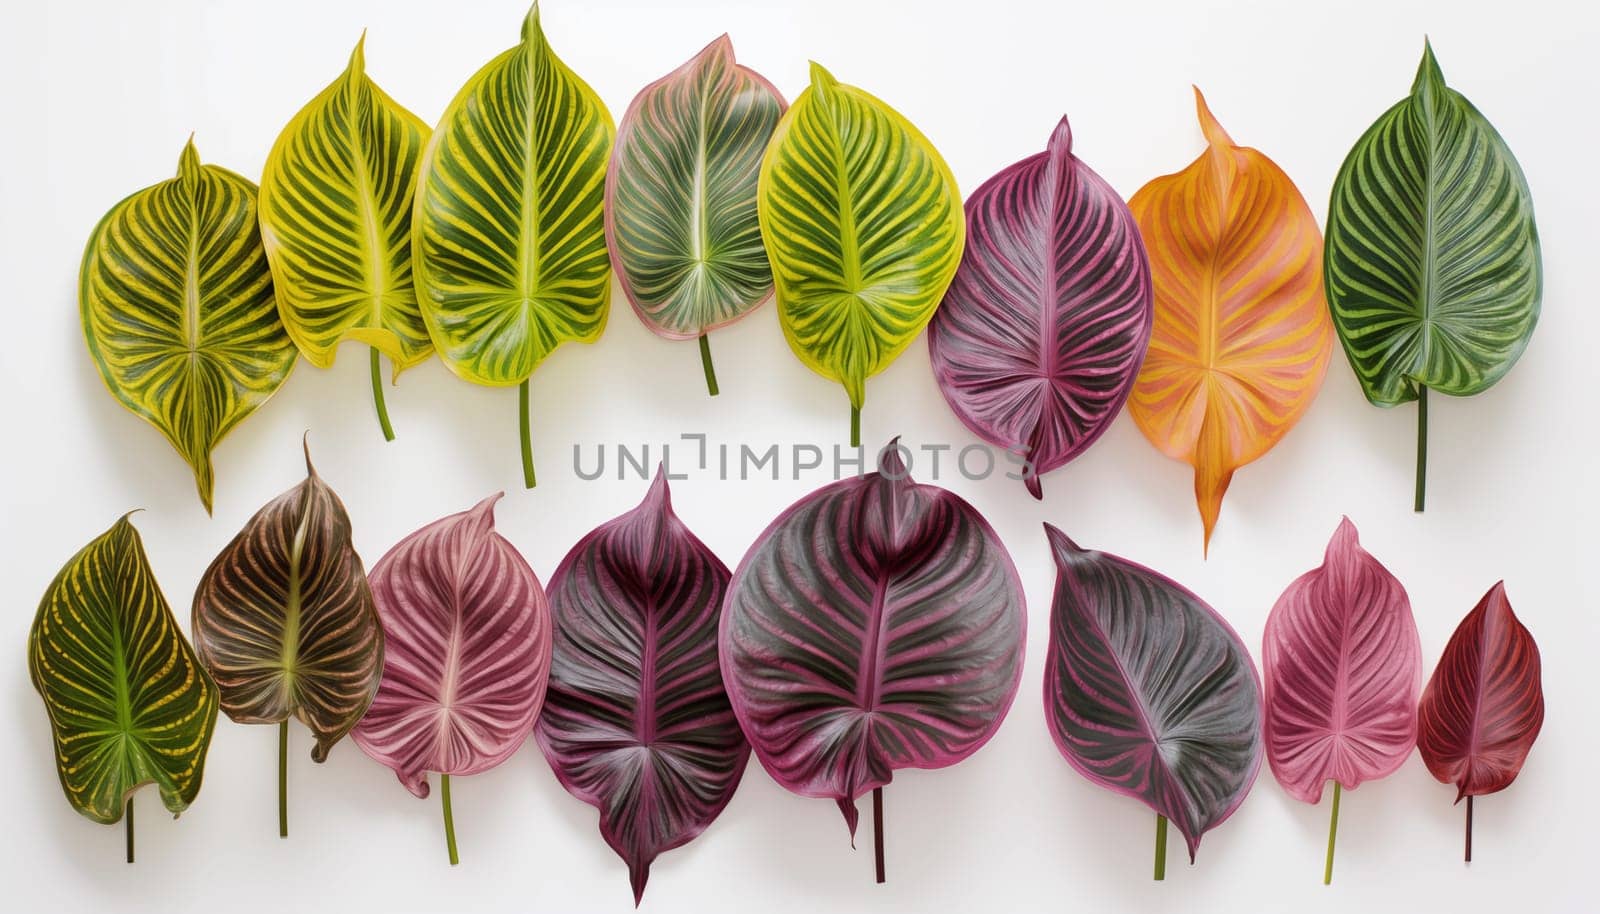 colorful Prayer Plants, isolated, white background. by Nadtochiy